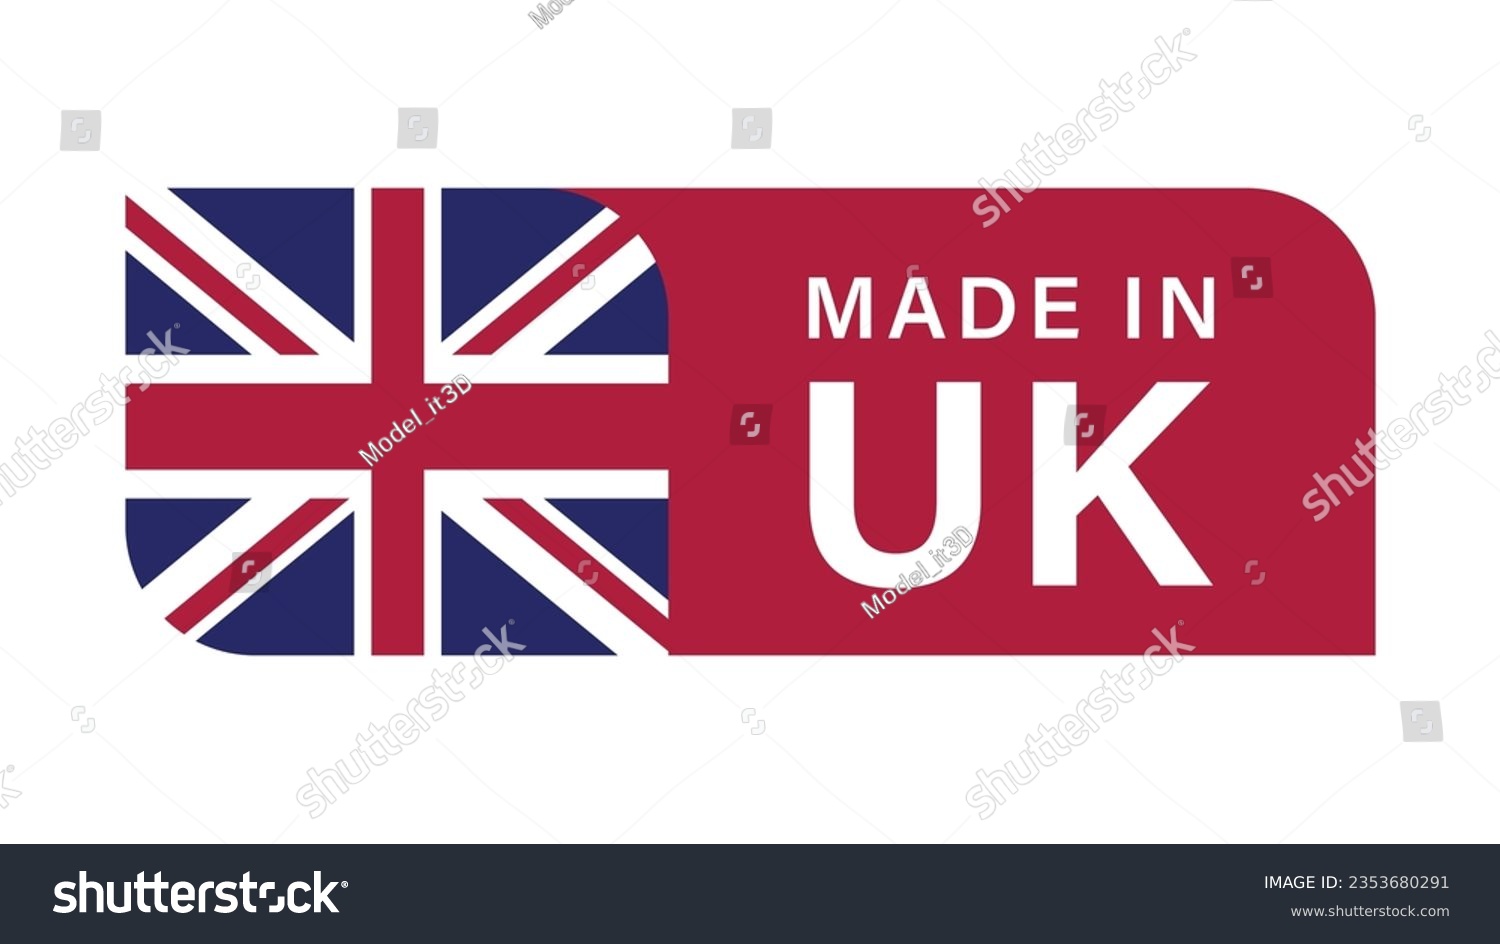 SVG of Made In UK Label Banner Isolated on Monochrome Background svg